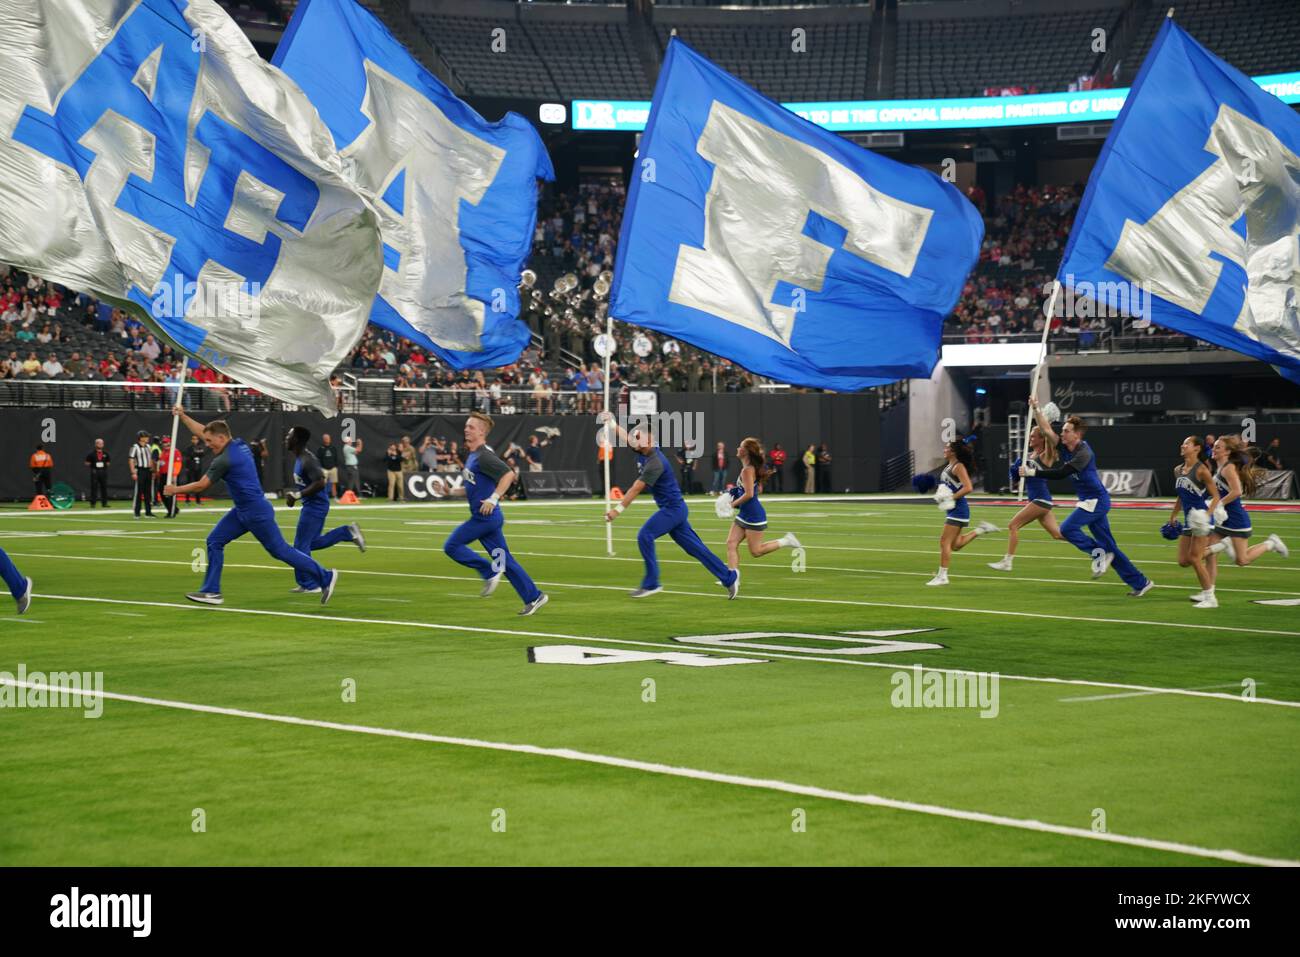 United States Air Force Academy cheerleaders run out on the field holding  spirit flags at Allegiant Stadium in Las Vegas, Nevada, Oct. 15, 2022. The Air  Force Academy competed in a football